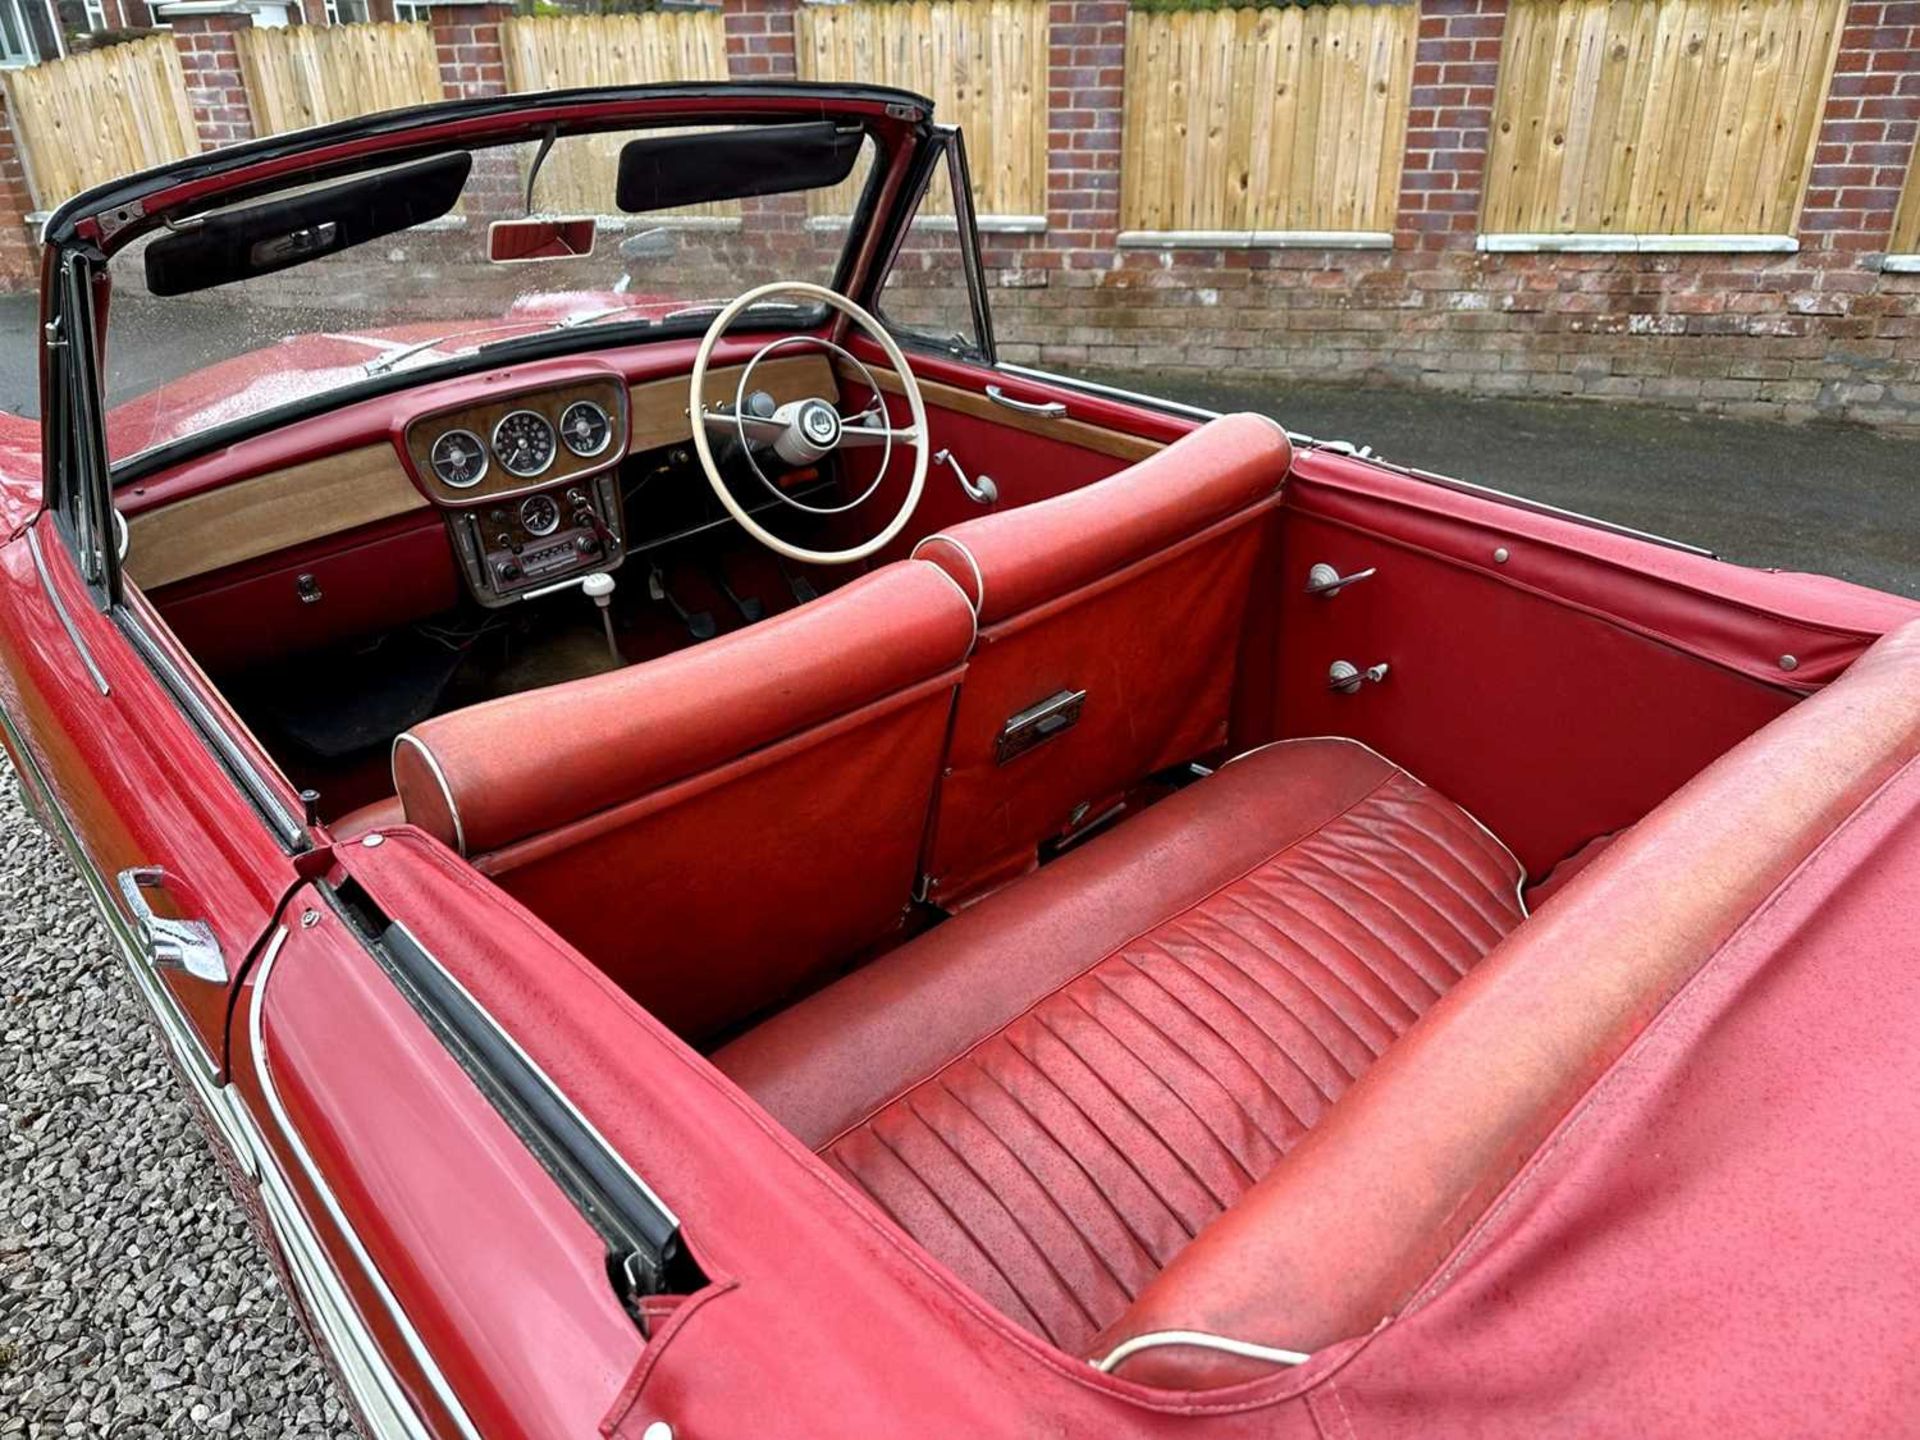 1961 Singer Gazelle Convertible Comes complete with overdrive, period radio and badge bar - Image 42 of 95